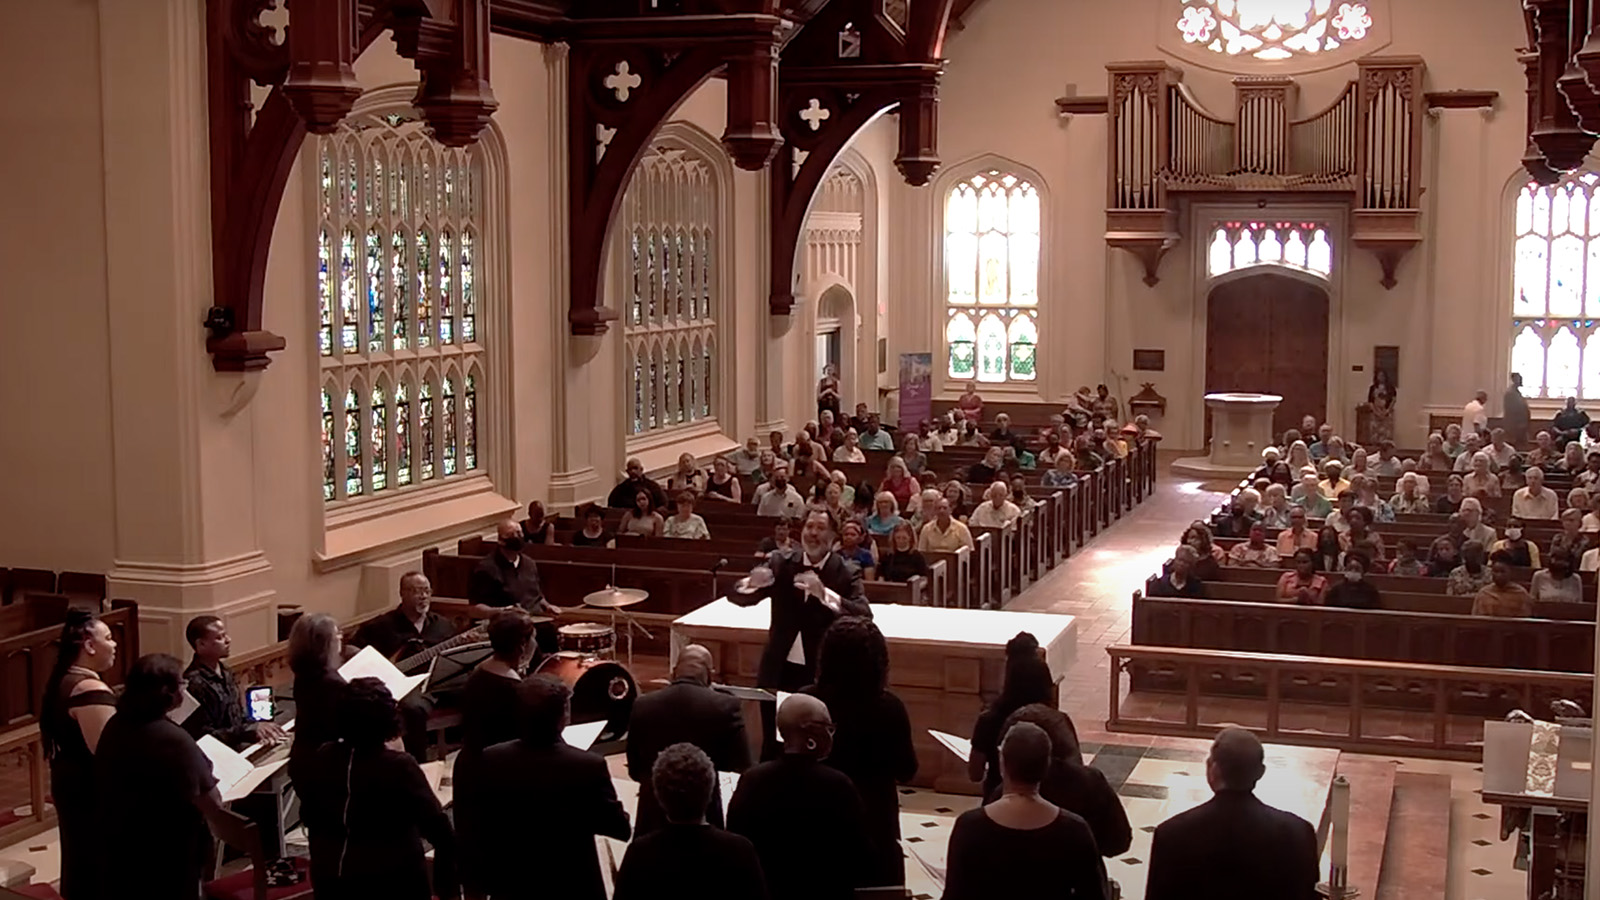 The Jacksonville Gospel Chorale performs the Mass of St. Cyprian at St. John’s Episcopal Cathedral, Saturday, June 18, 2022, in Jacksonville, Florida, to commemorate the Juneteenth holiday. Video screen grab